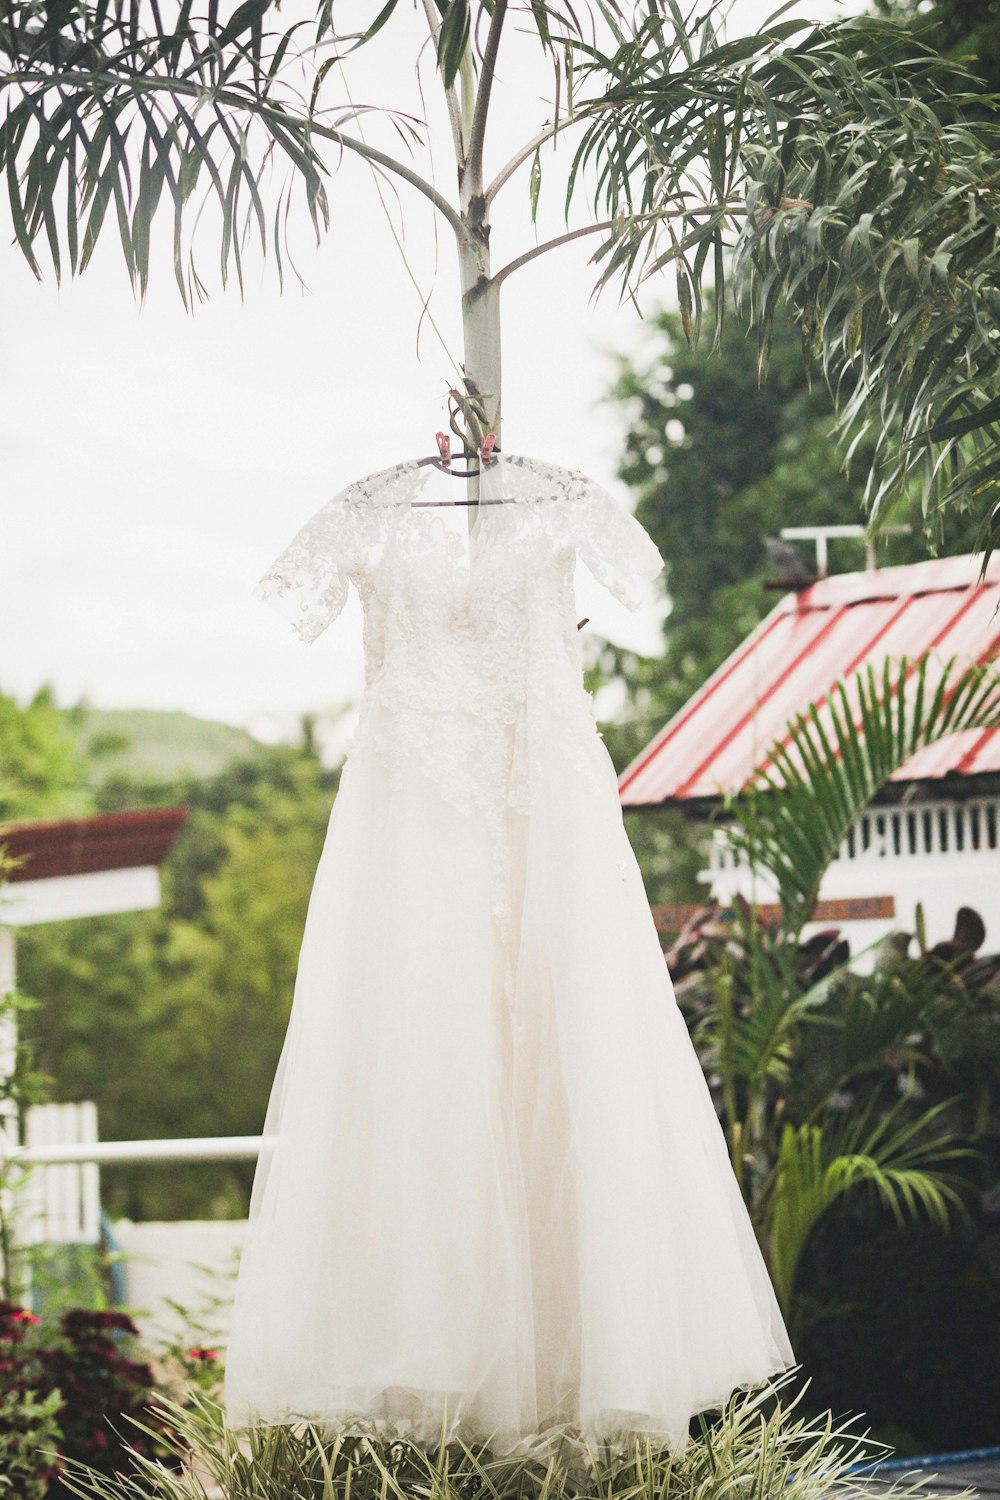 a wedding dress from a tree